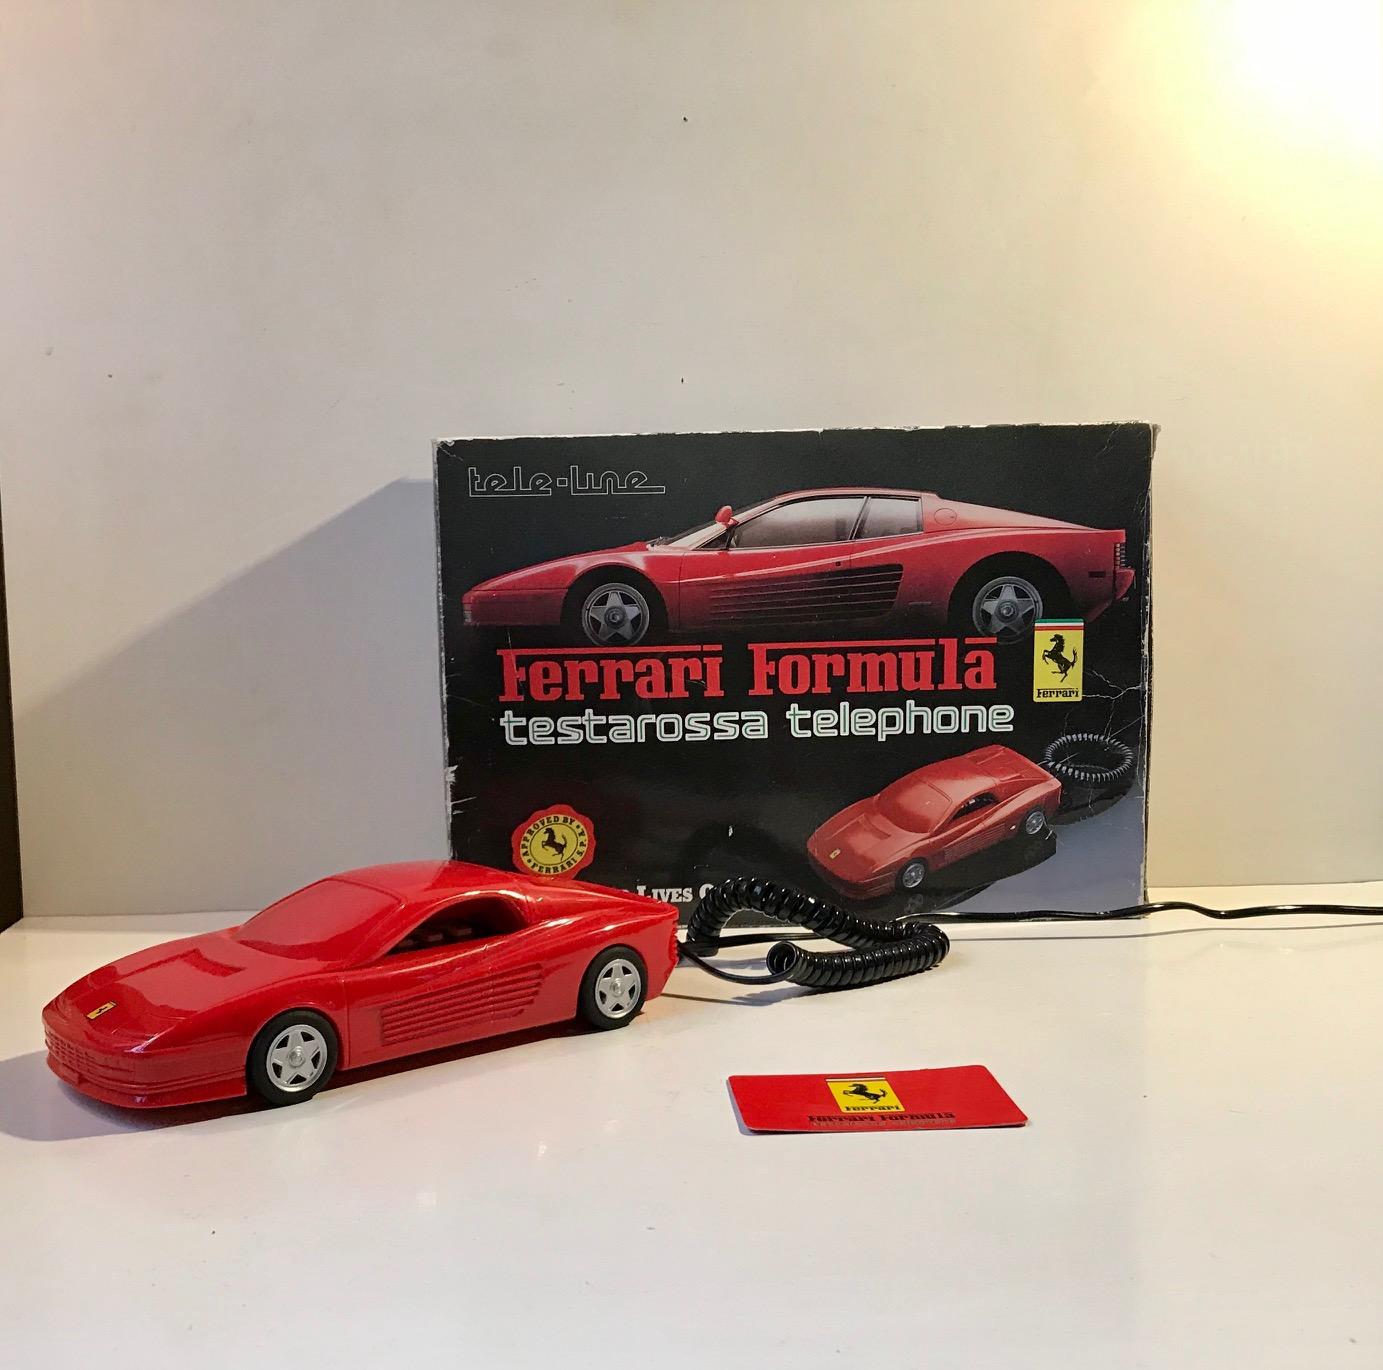 Unused vintage telephone in the shape of this red Ferrari Testarossa. Manufactured by Häger in Germany during the late 1980s. It is made from plastic and has press-buttons. Approved and licensed by Ferrari. It comes as a full set with outer box,